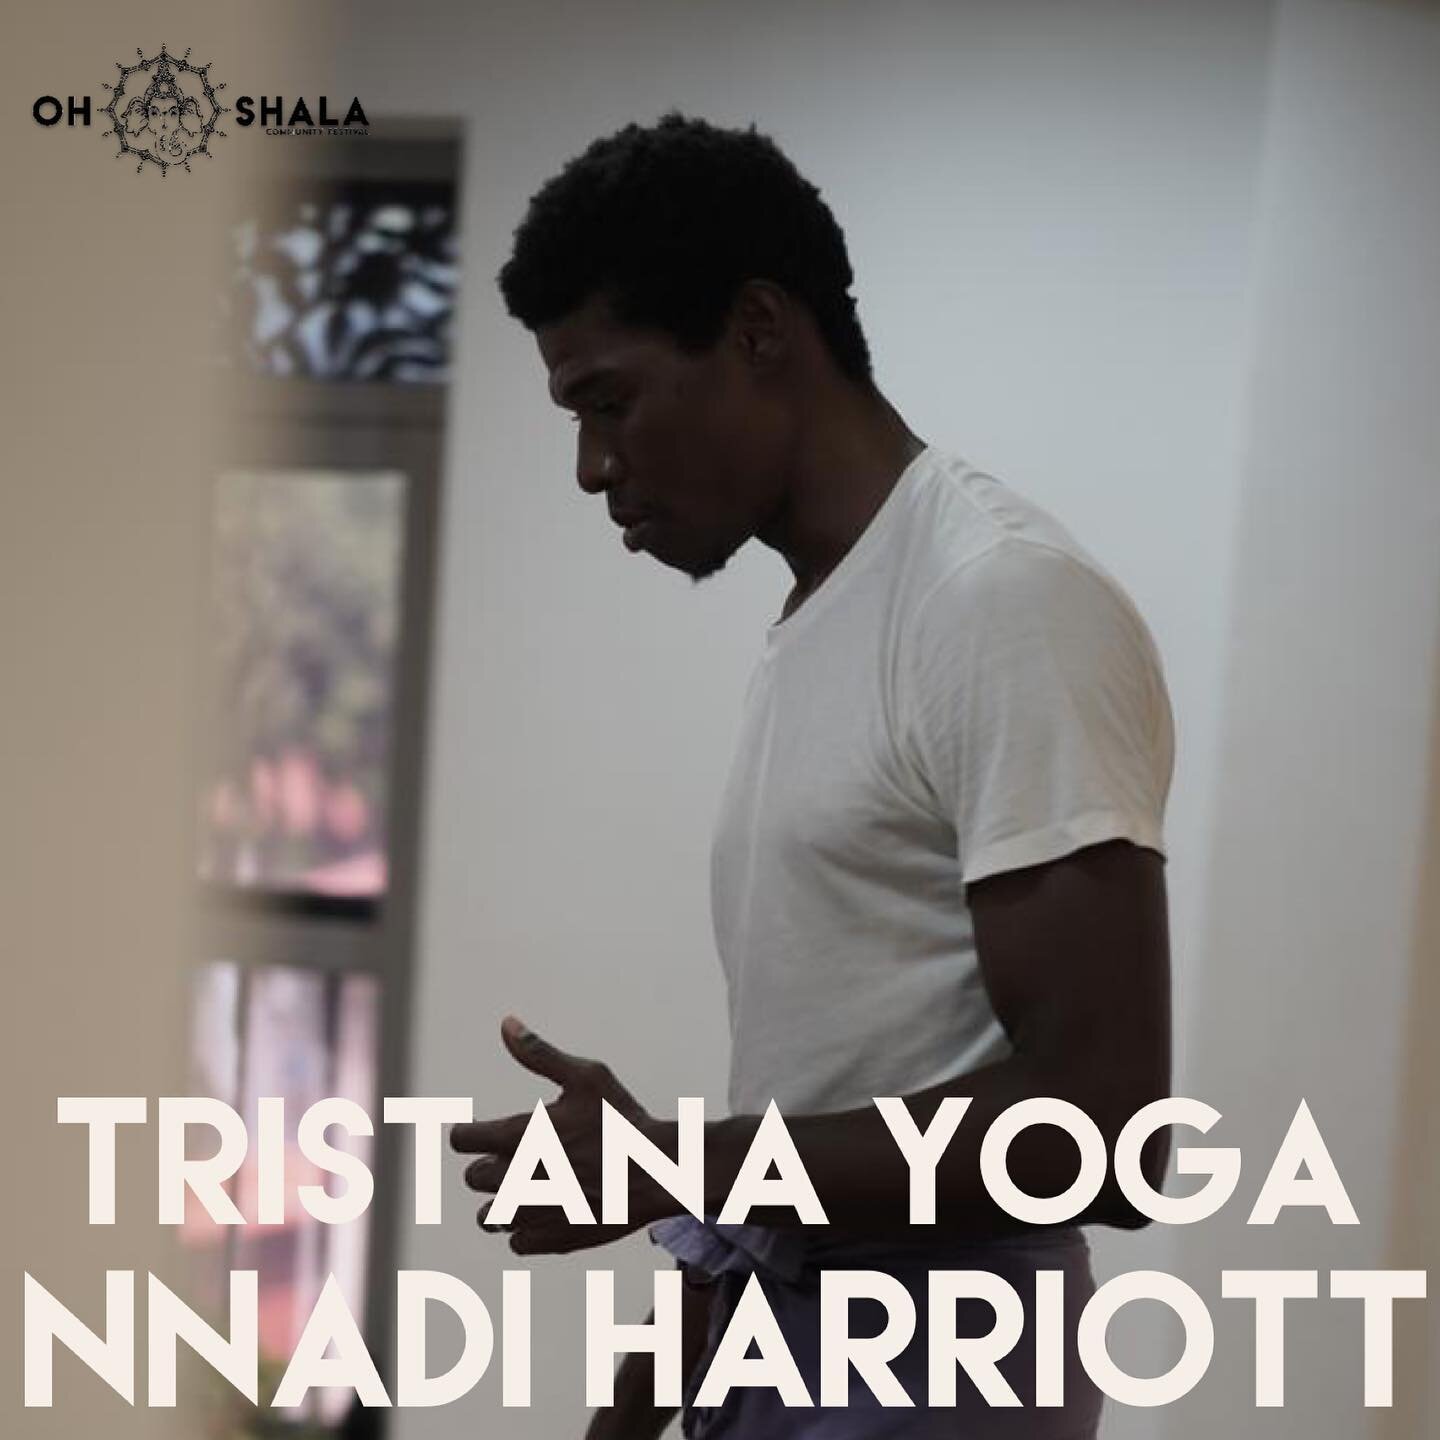 We welcome @nnadi.harriott to the Oh Shala Festival. 
.
Nnadi has had the pleasure to share his practice worldwide. He discovered yoga asana in 2995 which led him to Ashtanga Yoga. He is a dedicated and direct student of Sharath of the Sharath Yoga C